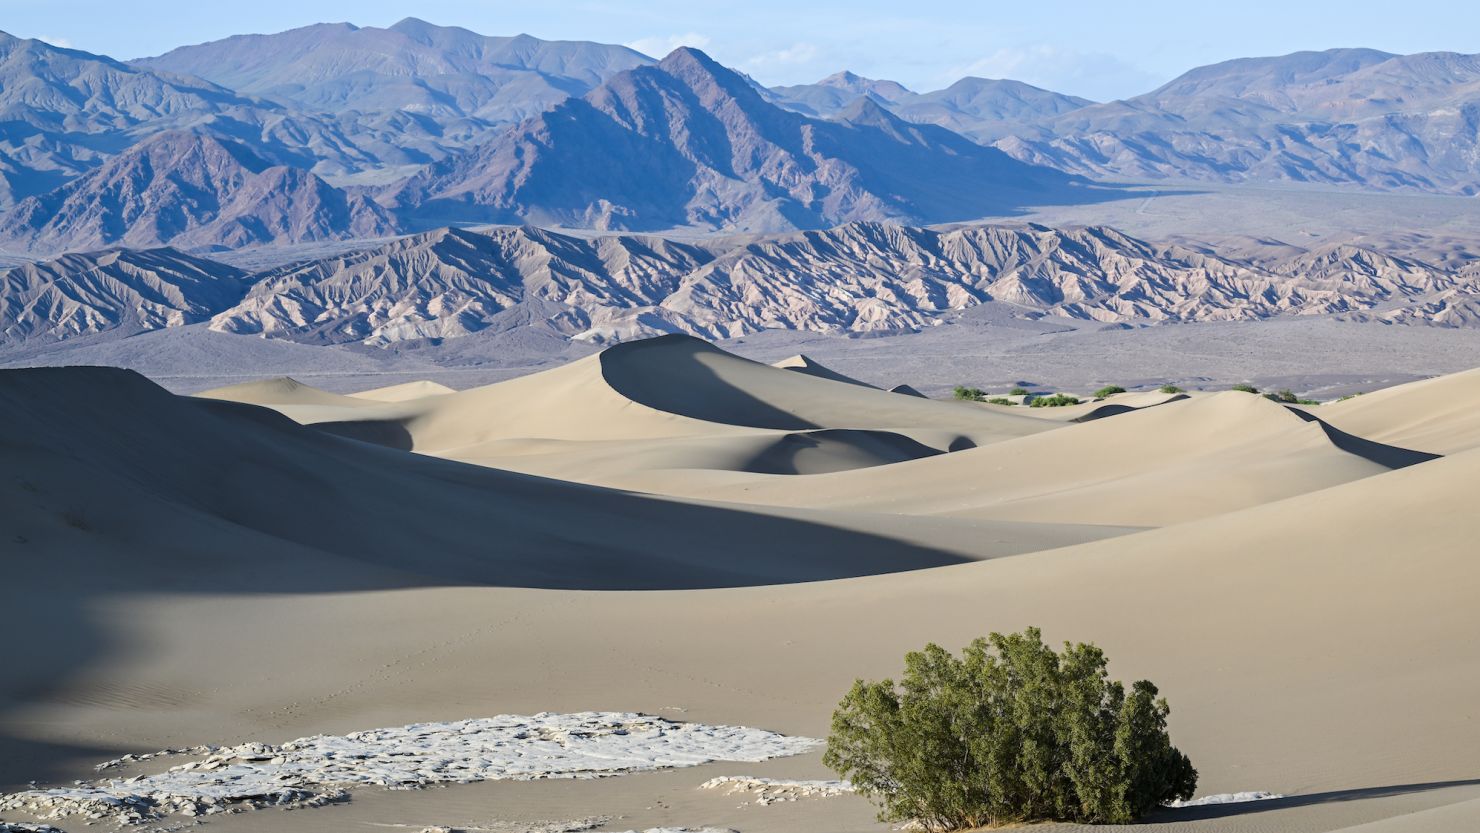  A view of Mesquite Flat Sand Dunes during sunset at Death Valley National Park in California on April 23, 2023.